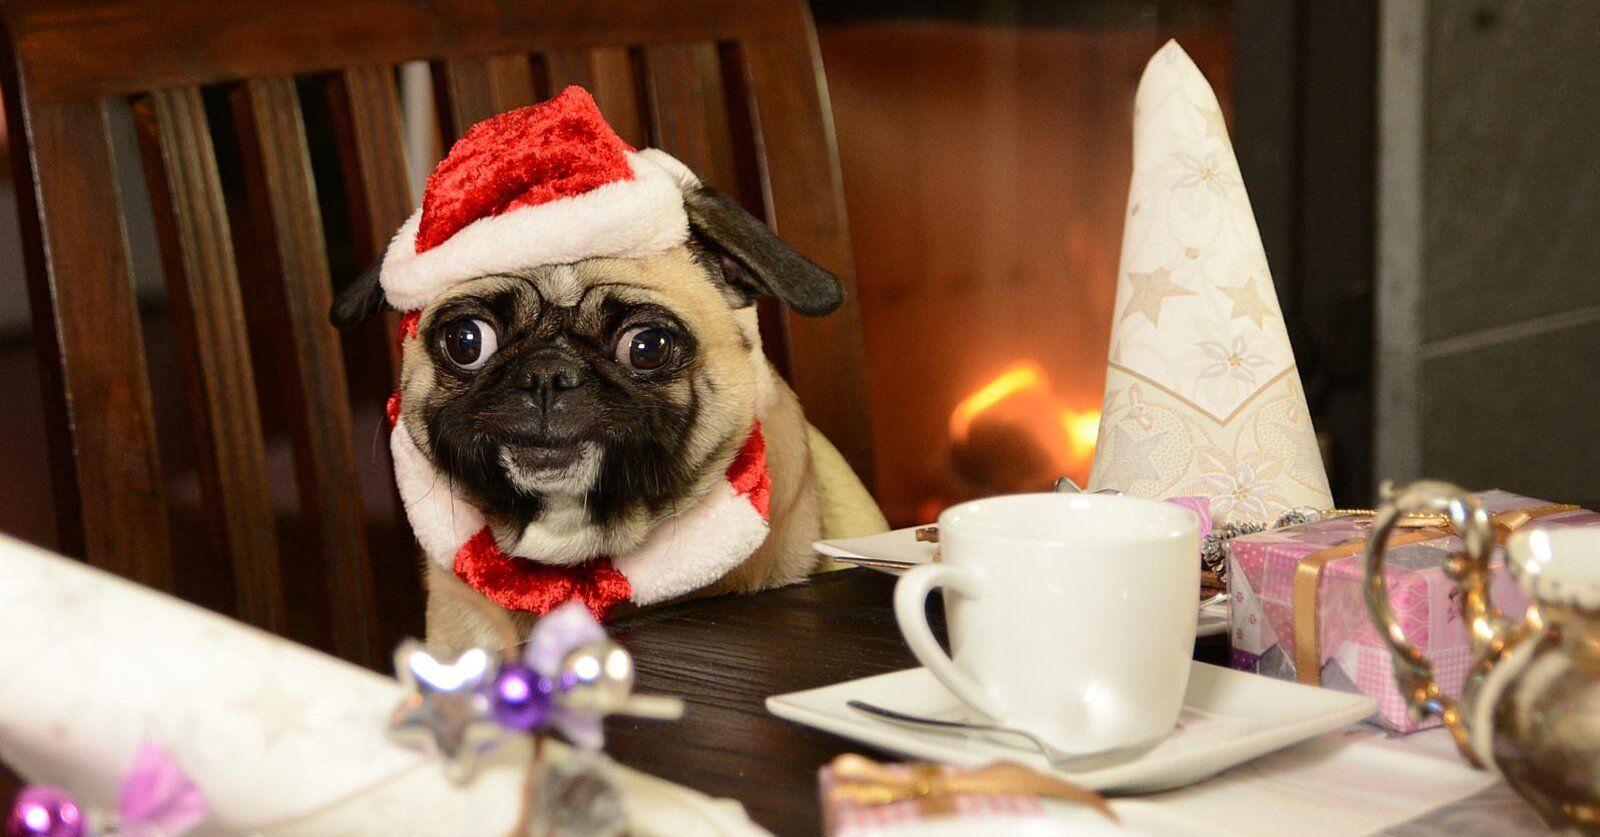 London's Pug Cafe Is Hosting a Christmas Party for Pomeranians, Pugs, and Sausage Dogs. Travel + Leisure